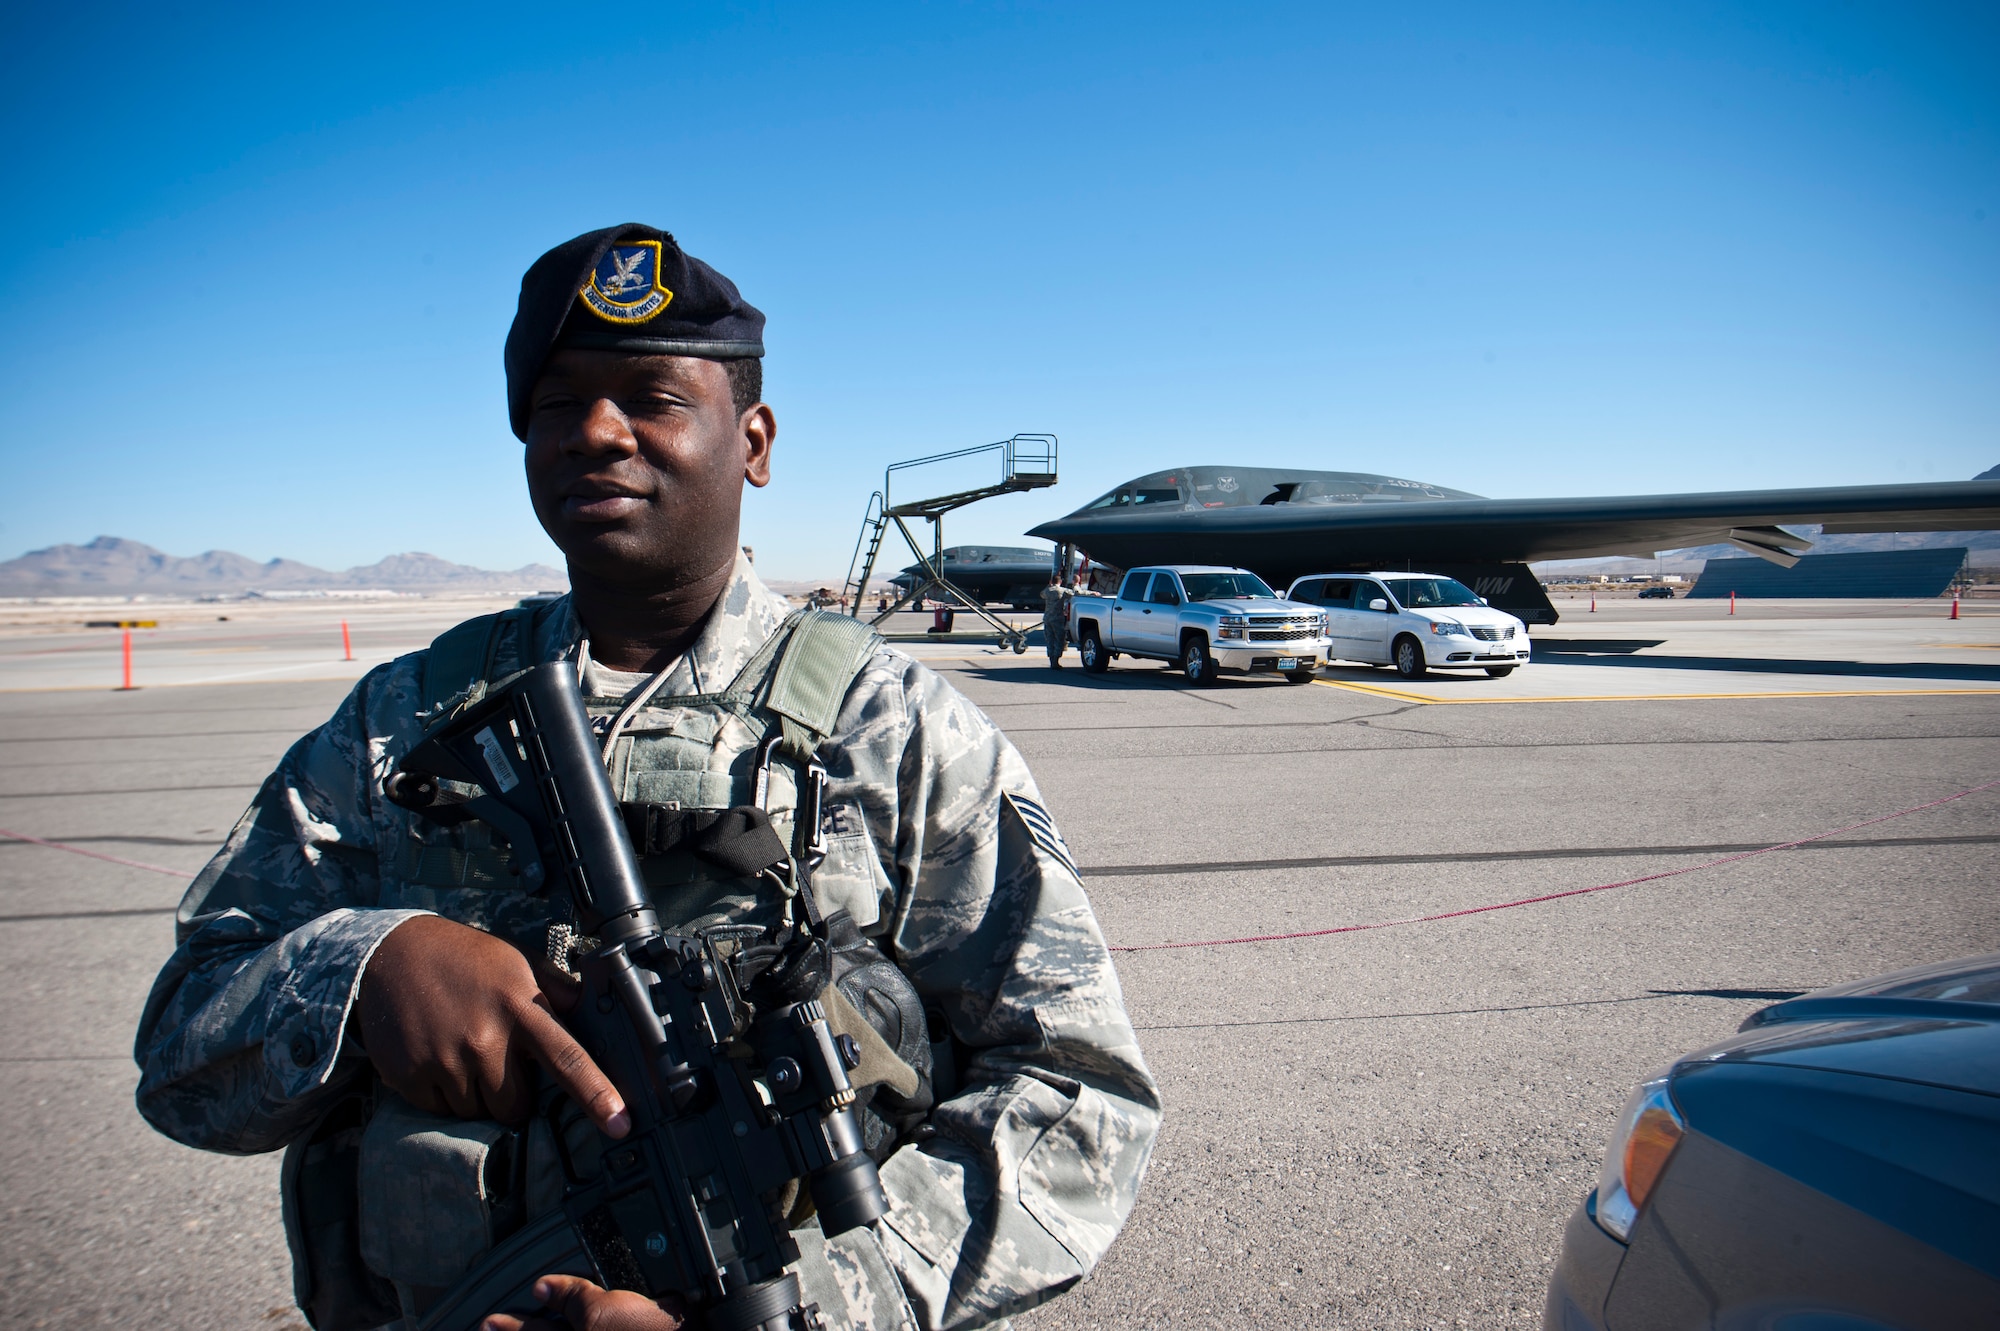 U.S. Air Force Staff Sgt. James Bovain, 509th Security Forces Squadron response force leader from Whiteman Air Force Base, Mo., stands guard at an entry control point on the flightline during Red Flag 14-1 Feb. 10, 2014, at Nellis AFB, Nev. The 13th Bomb Squadron, from Whiteman AFB, brought defenders from their home base since they’re accustomed to the specific guidelines of monitoring the B-2 and surrounding area. (U.S. Air Force photo by Airman 1st Class Thomas Spangler) 